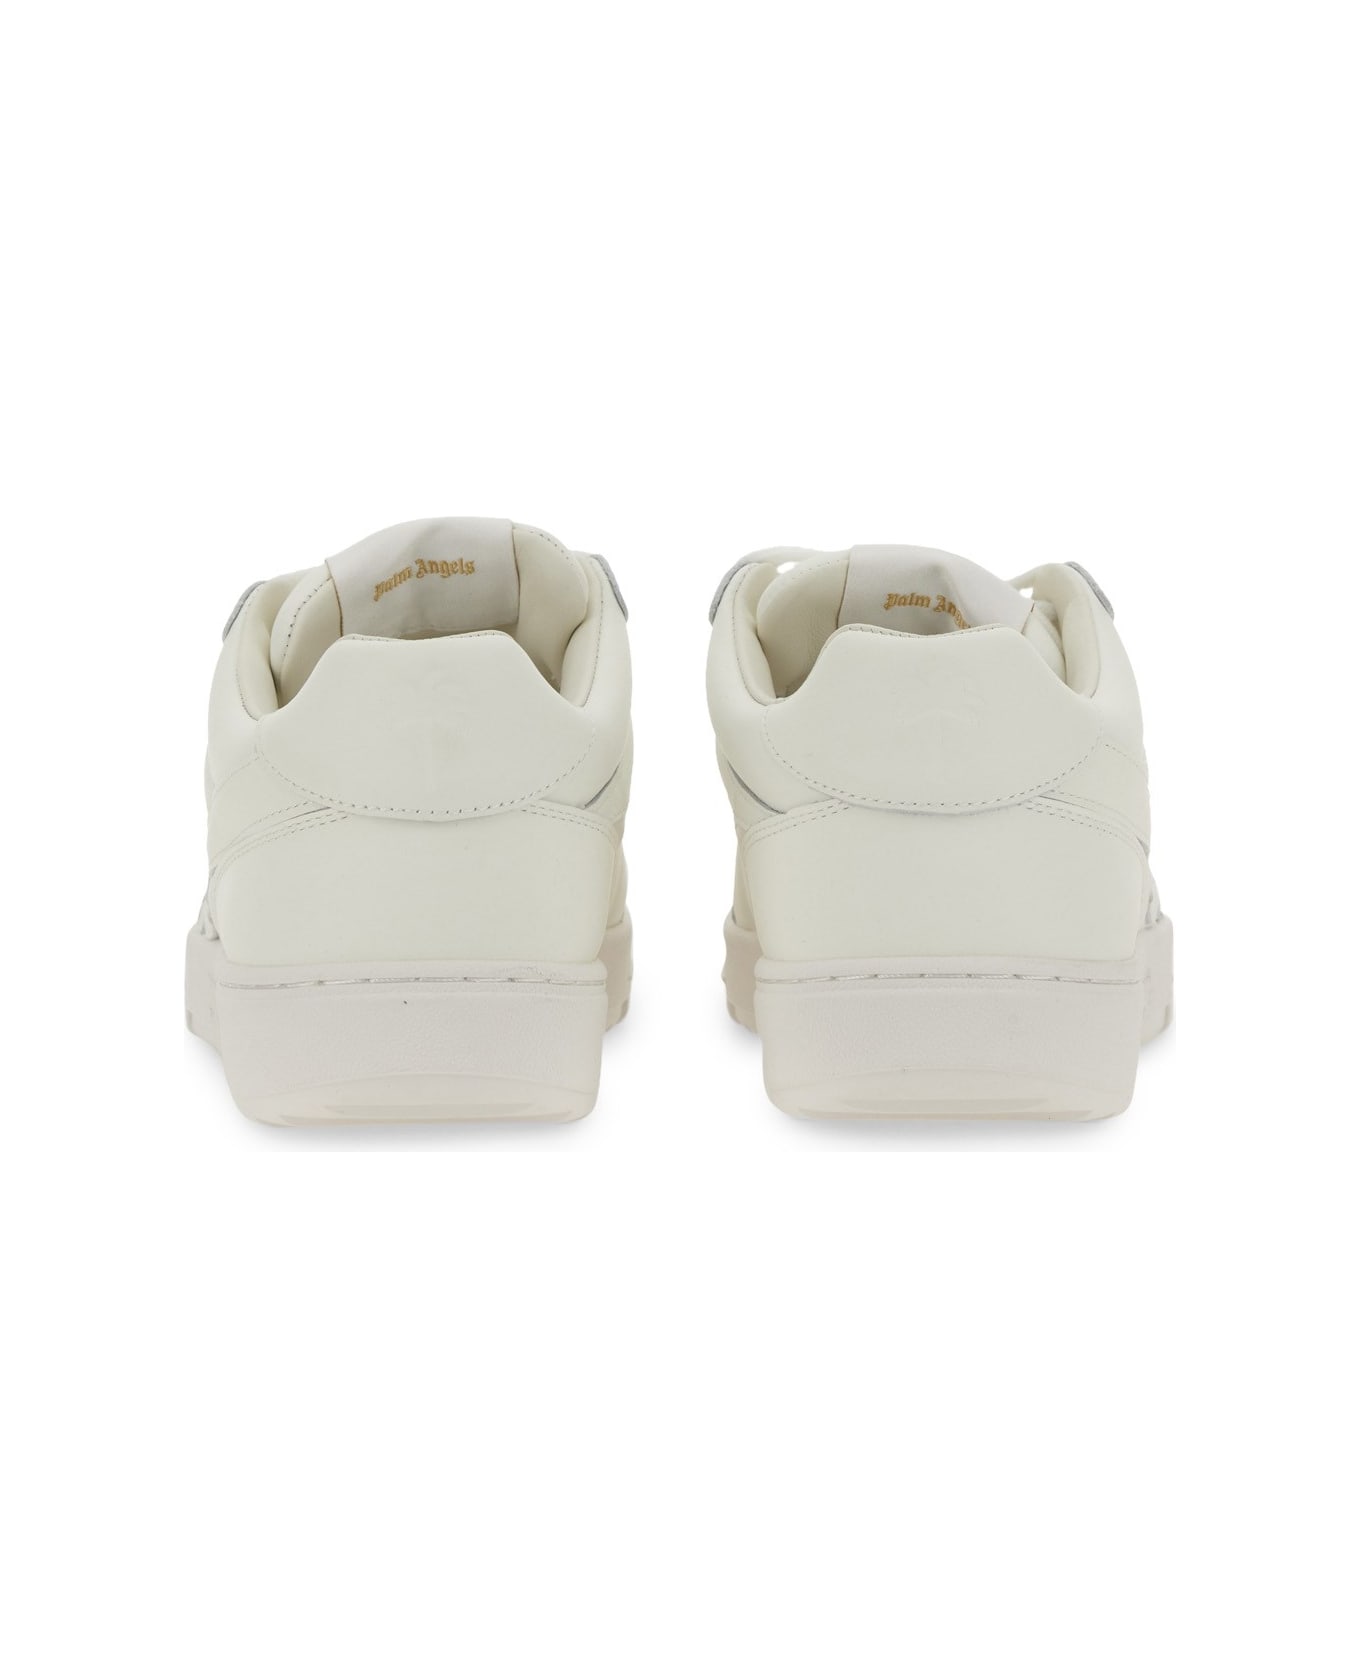 Palm Angels 'palm Beach University' White Leather Sneakers - BIANCO スニーカー